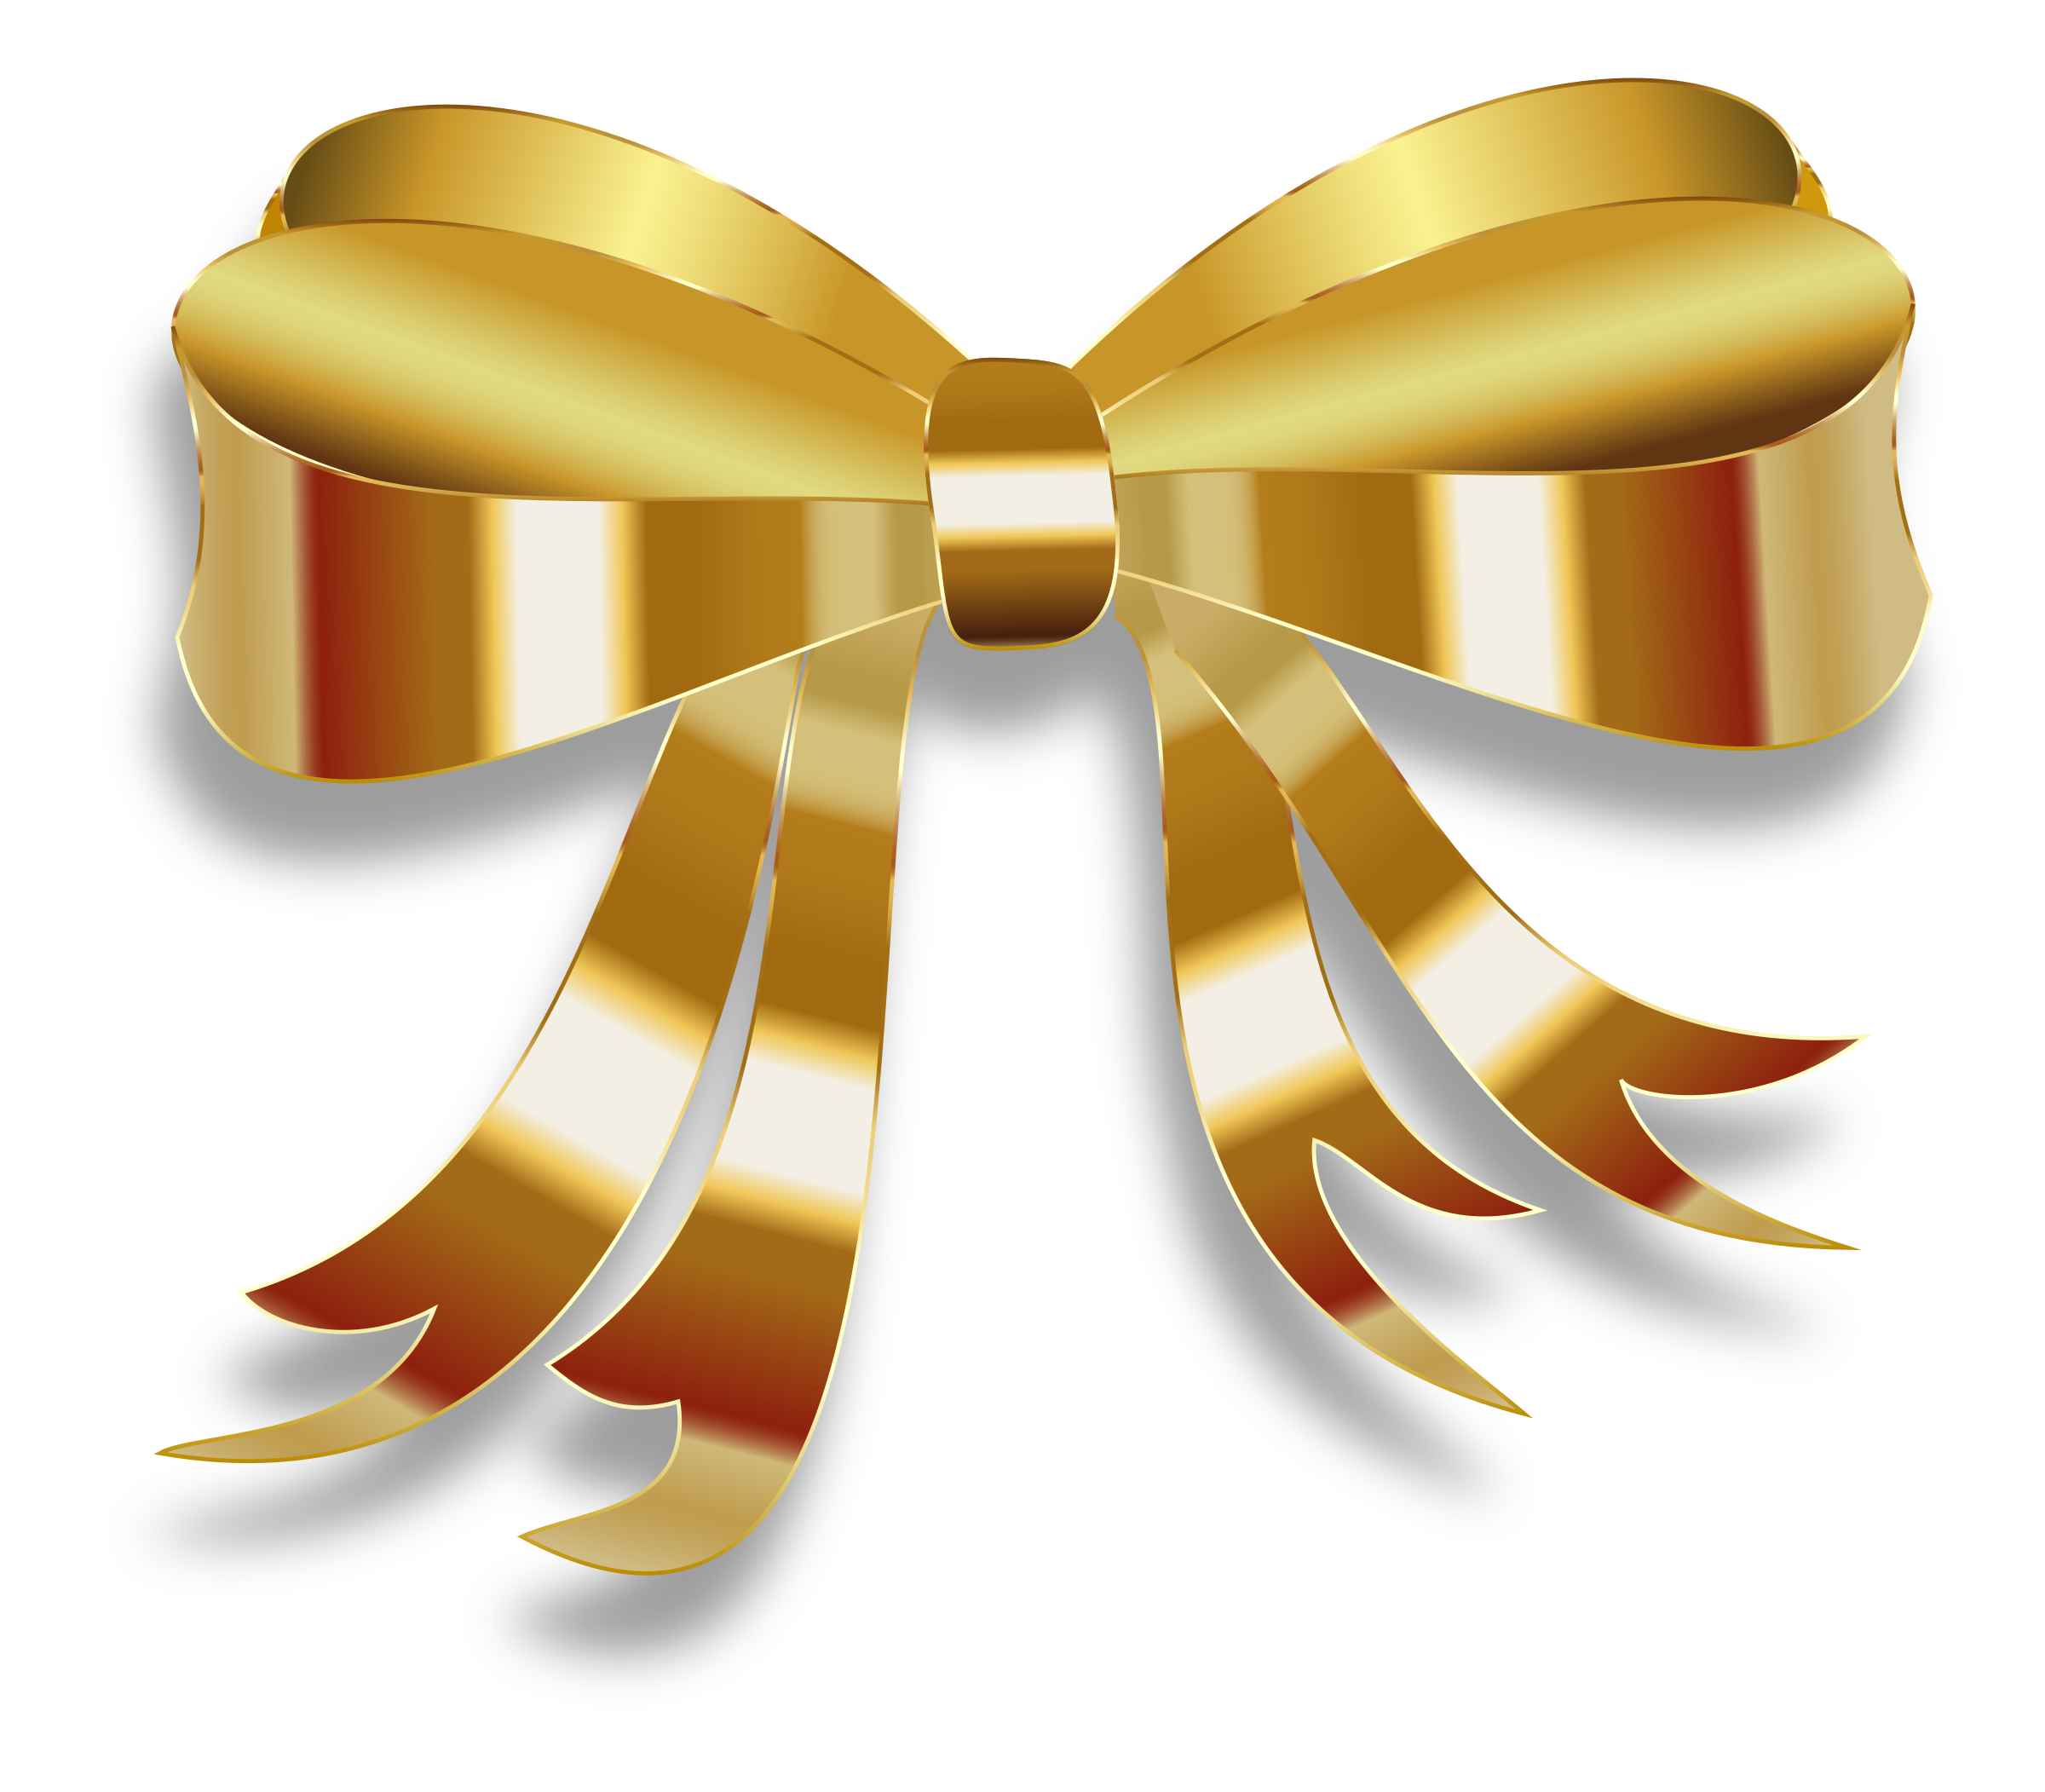 Gold Bows Or Ribbon Decorative Bow 3d Set, Gift, Present, Bow PNG  Transparent Image and Clipart for Free Download